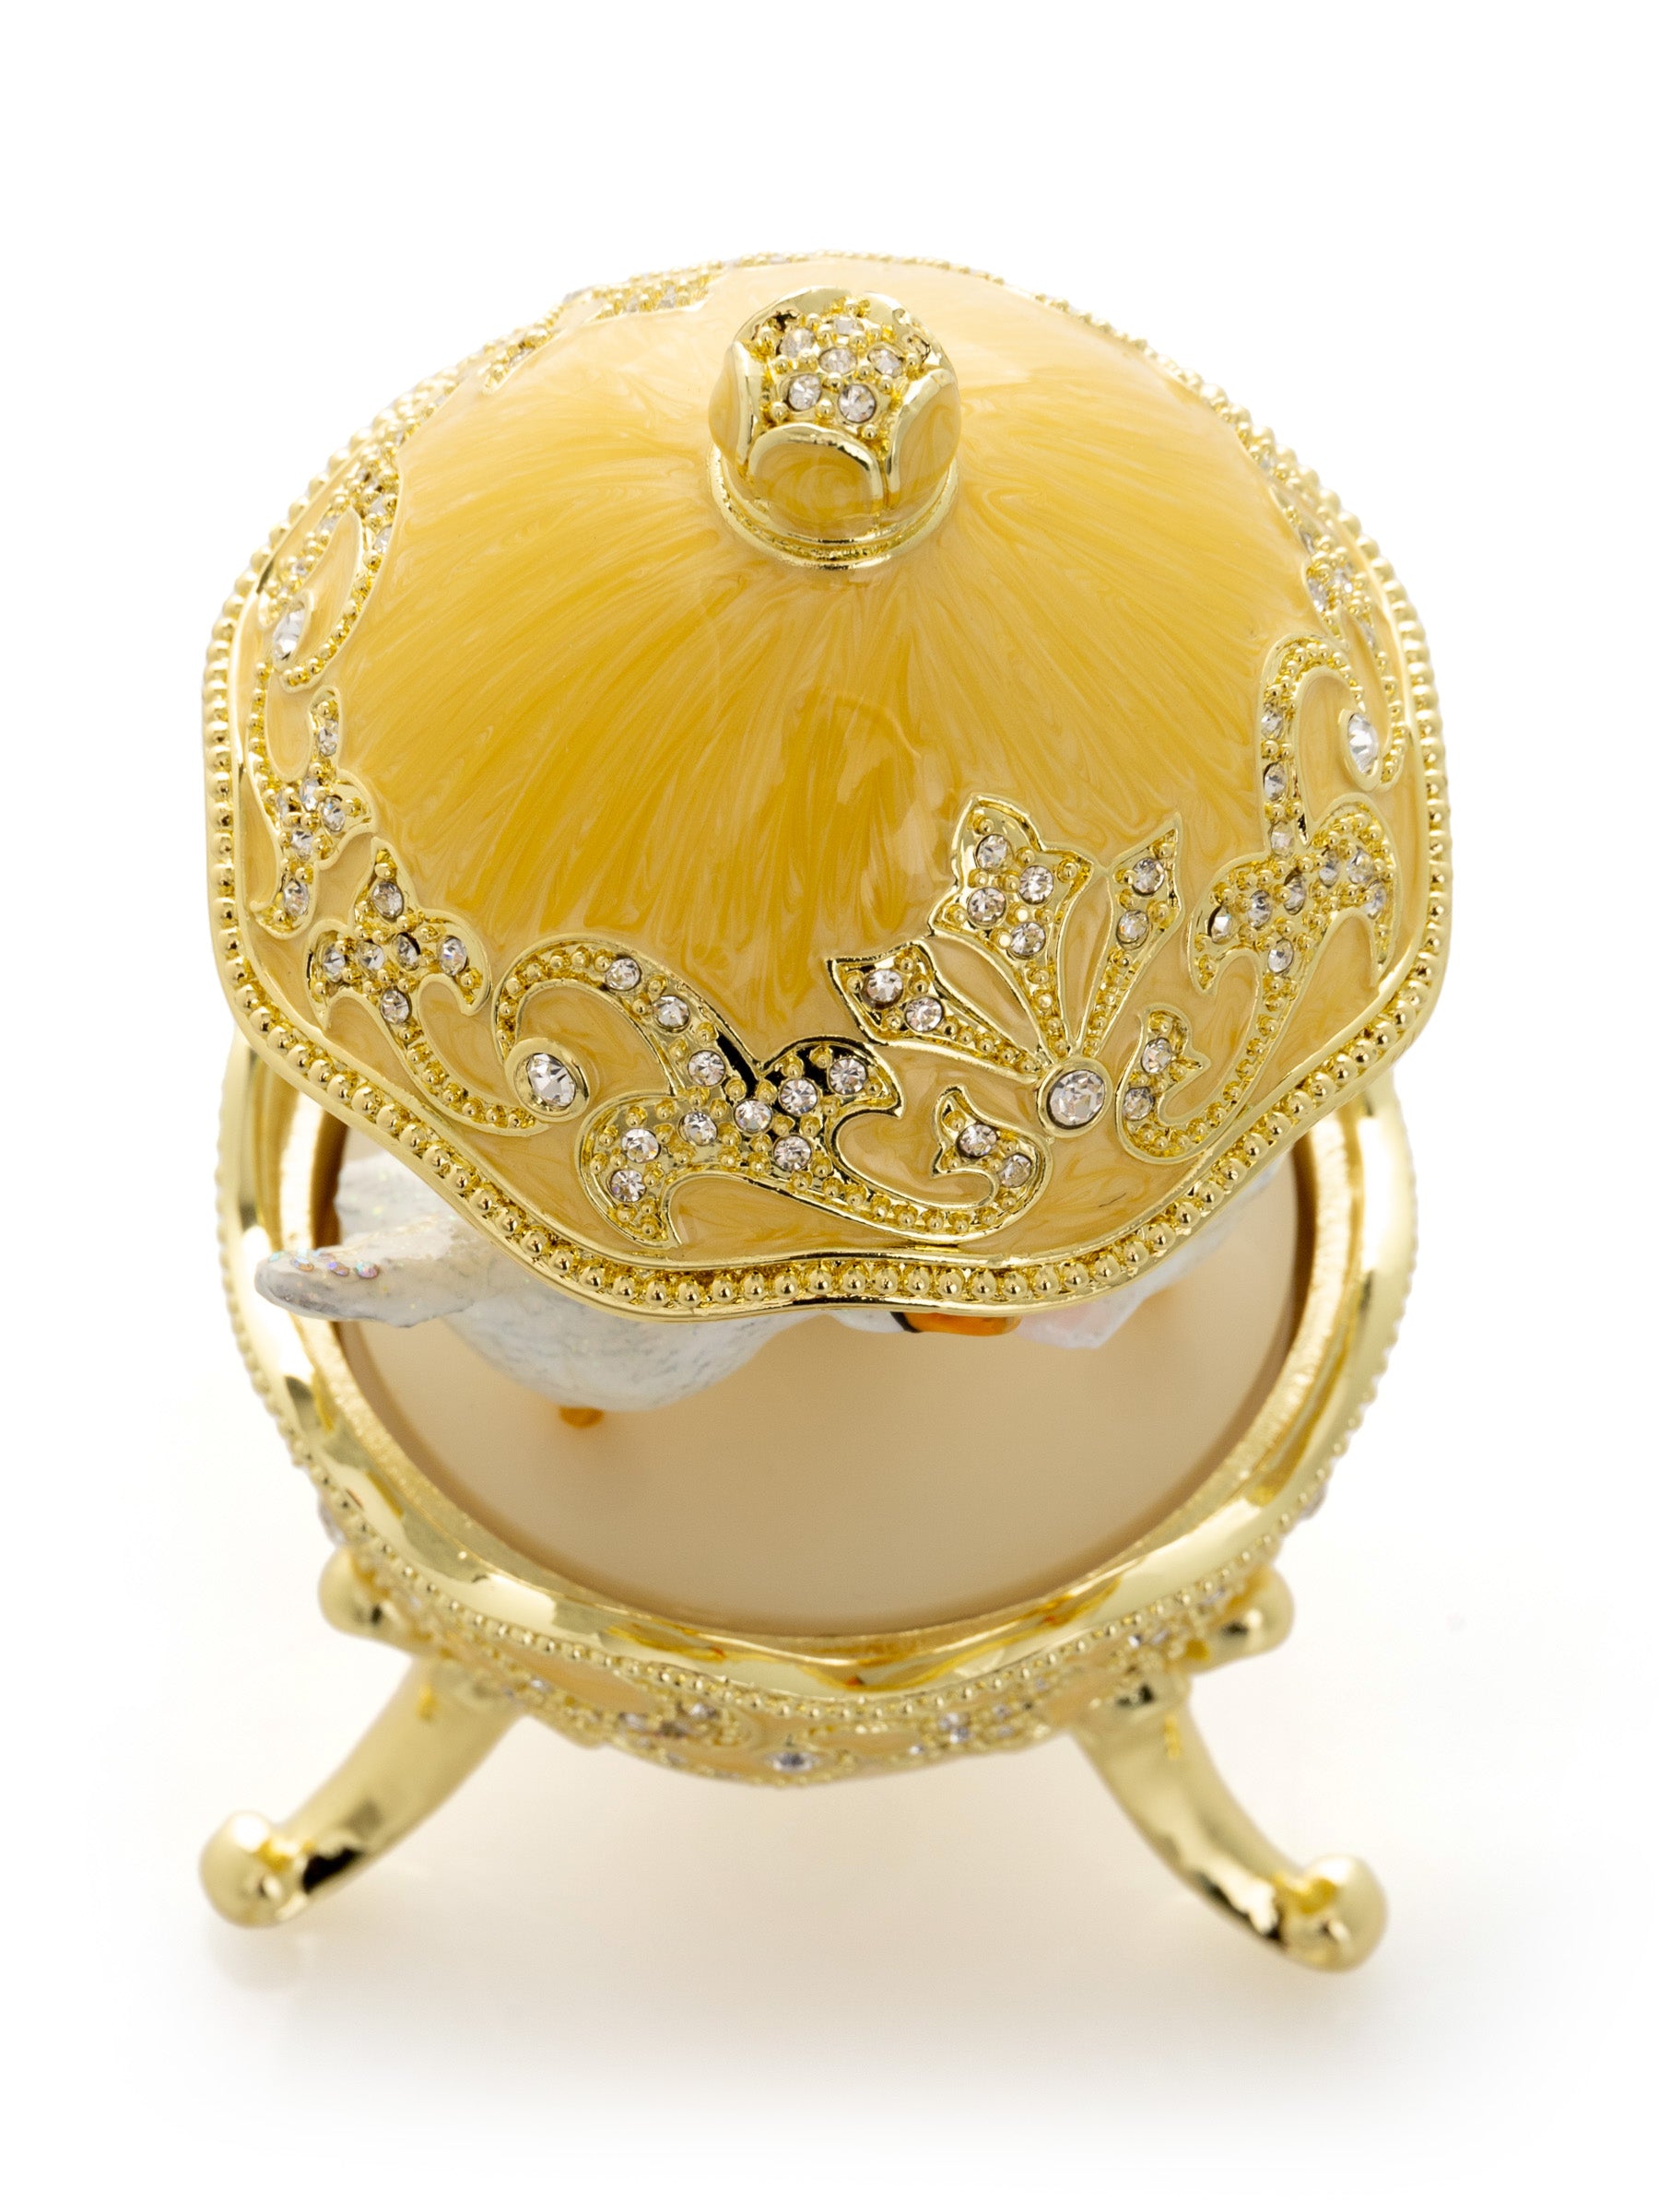 Yellow Carousel Egg with White Swans